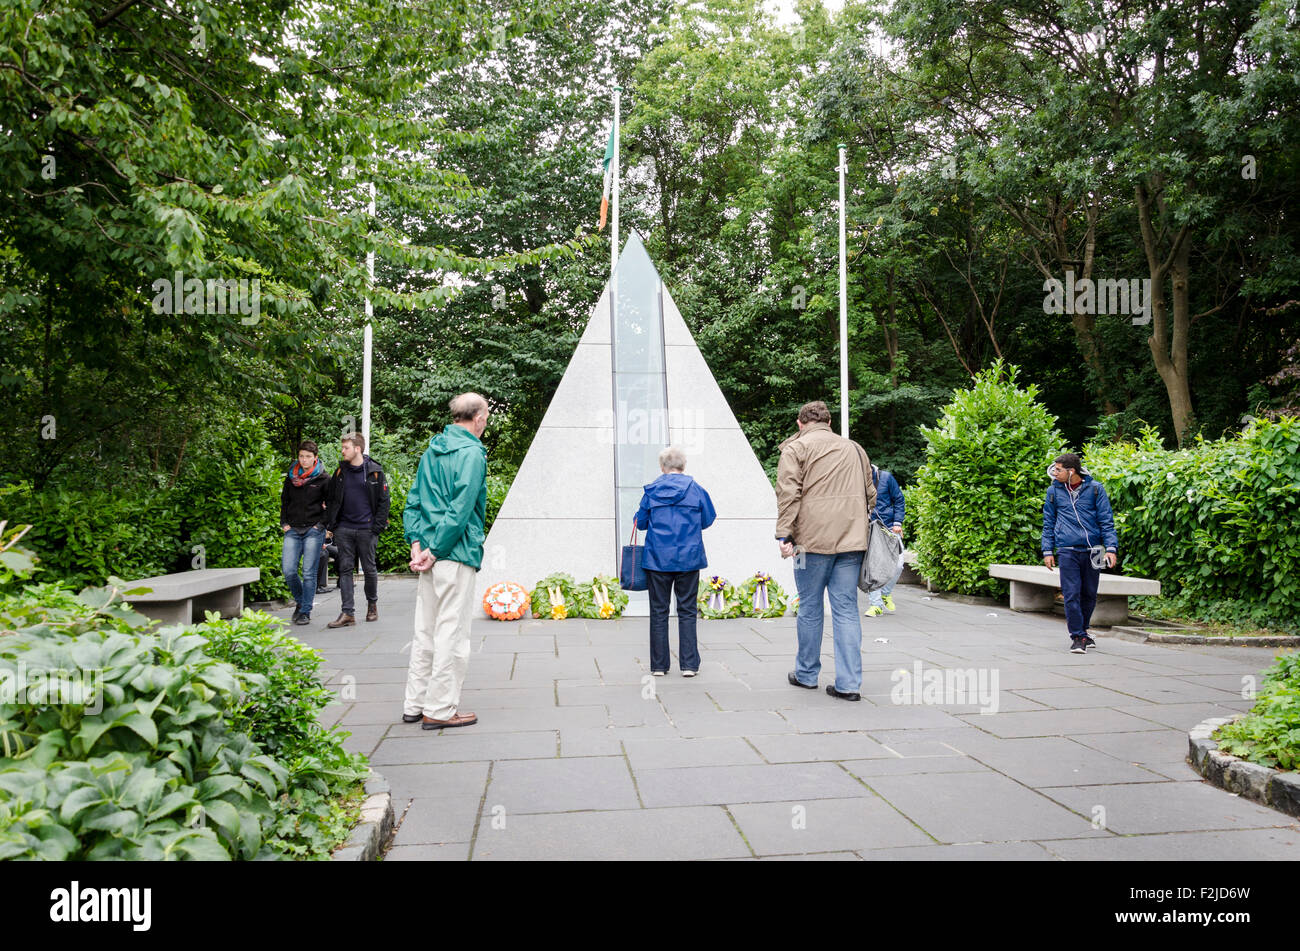 The National Memorial by Brian King in Merrion Square Park, Dublin, Ireland. 2008 Stock Photo